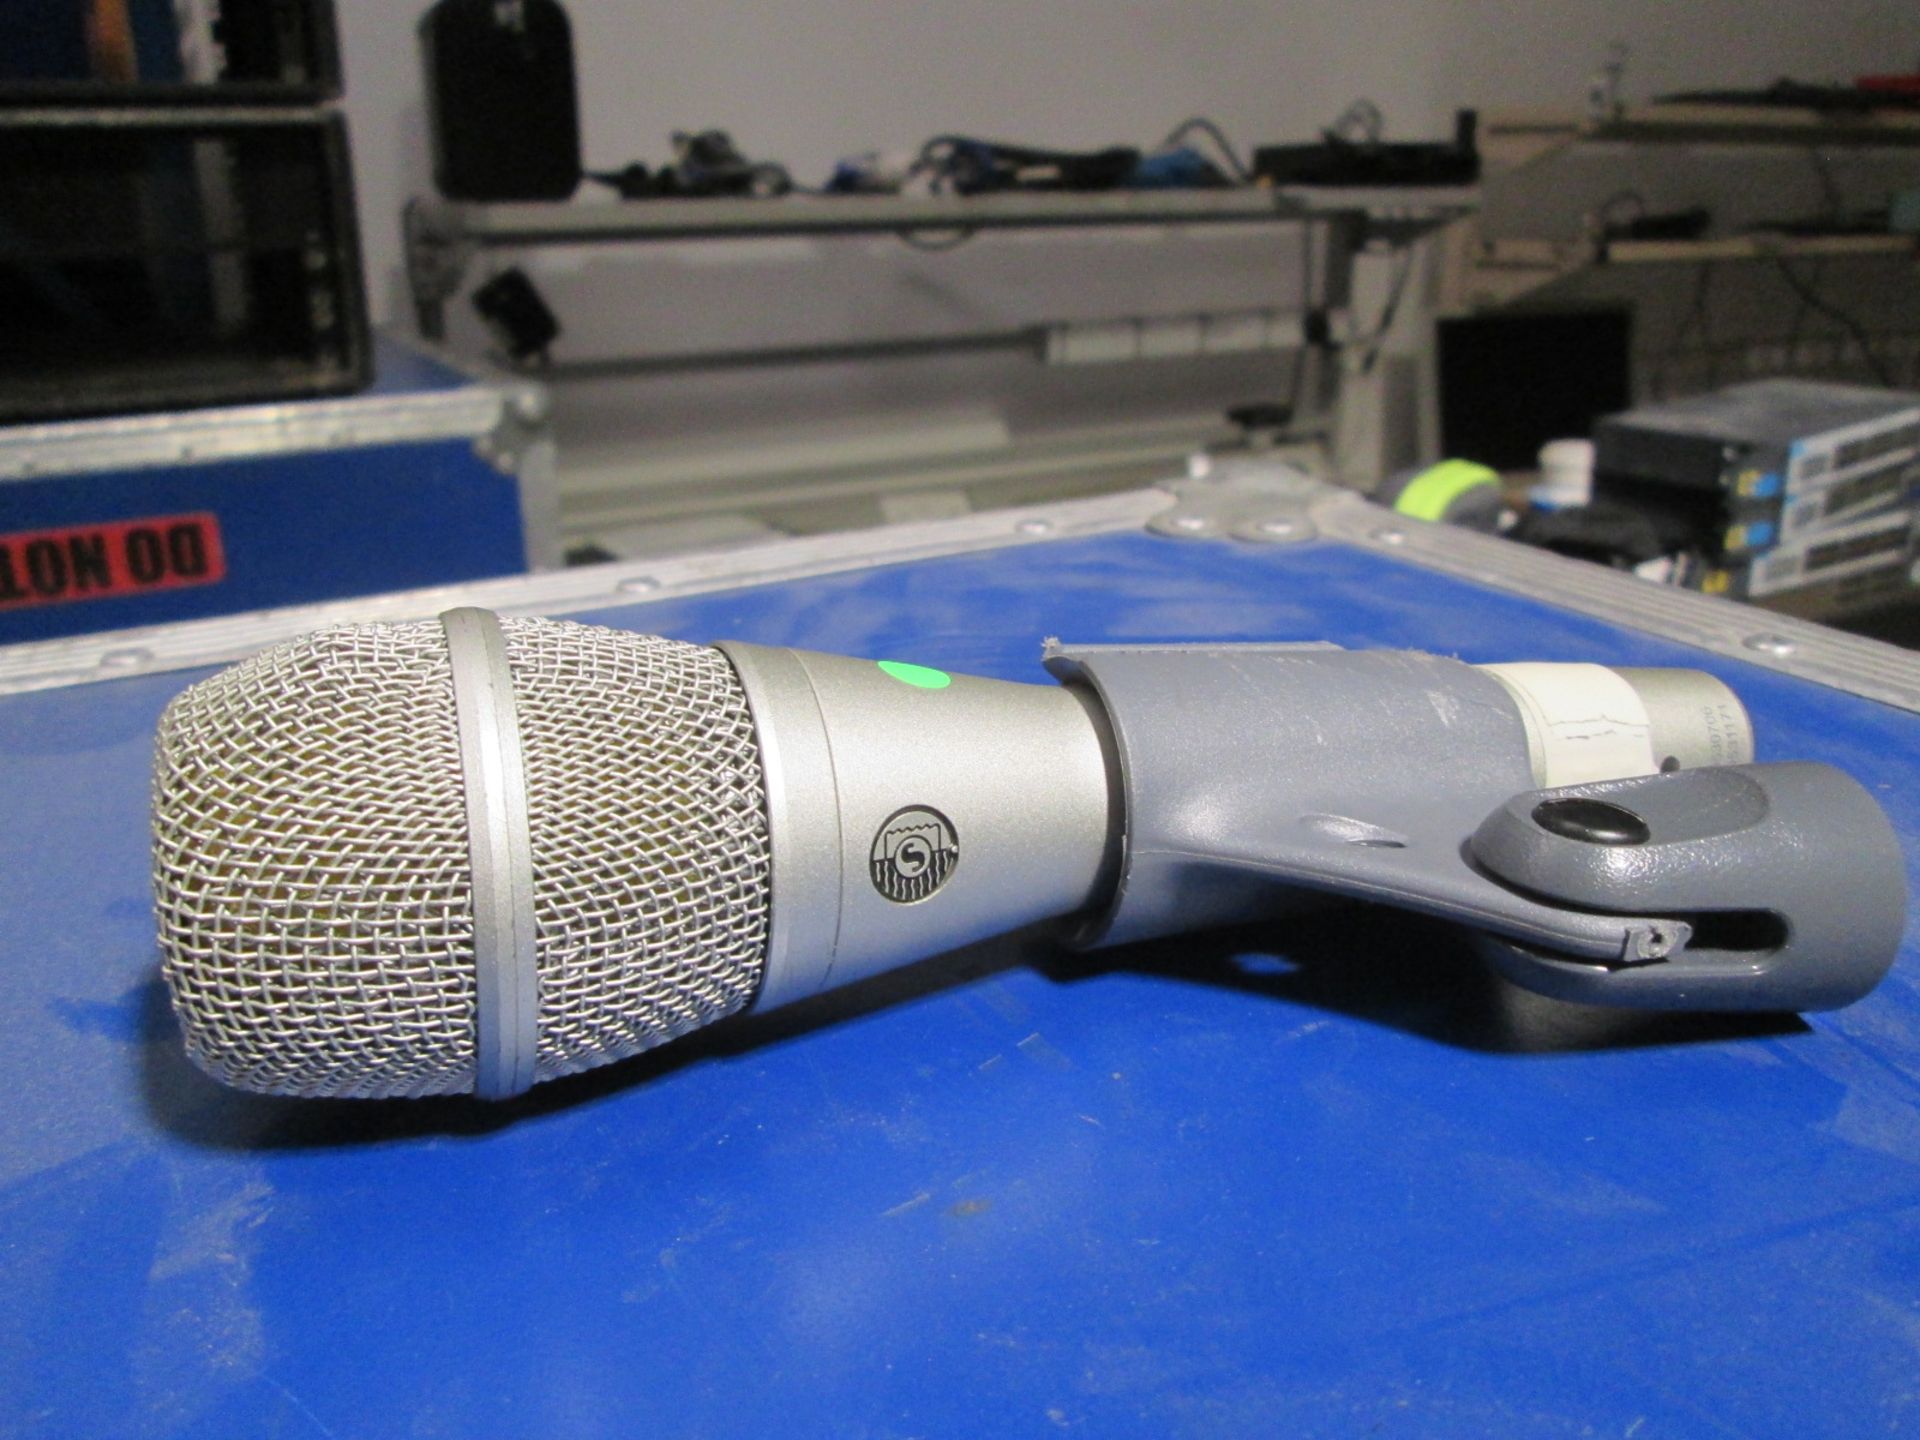 Shure KSM9 Dynamic Microphones (Qty 3) In flight and peli case - Image 3 of 8